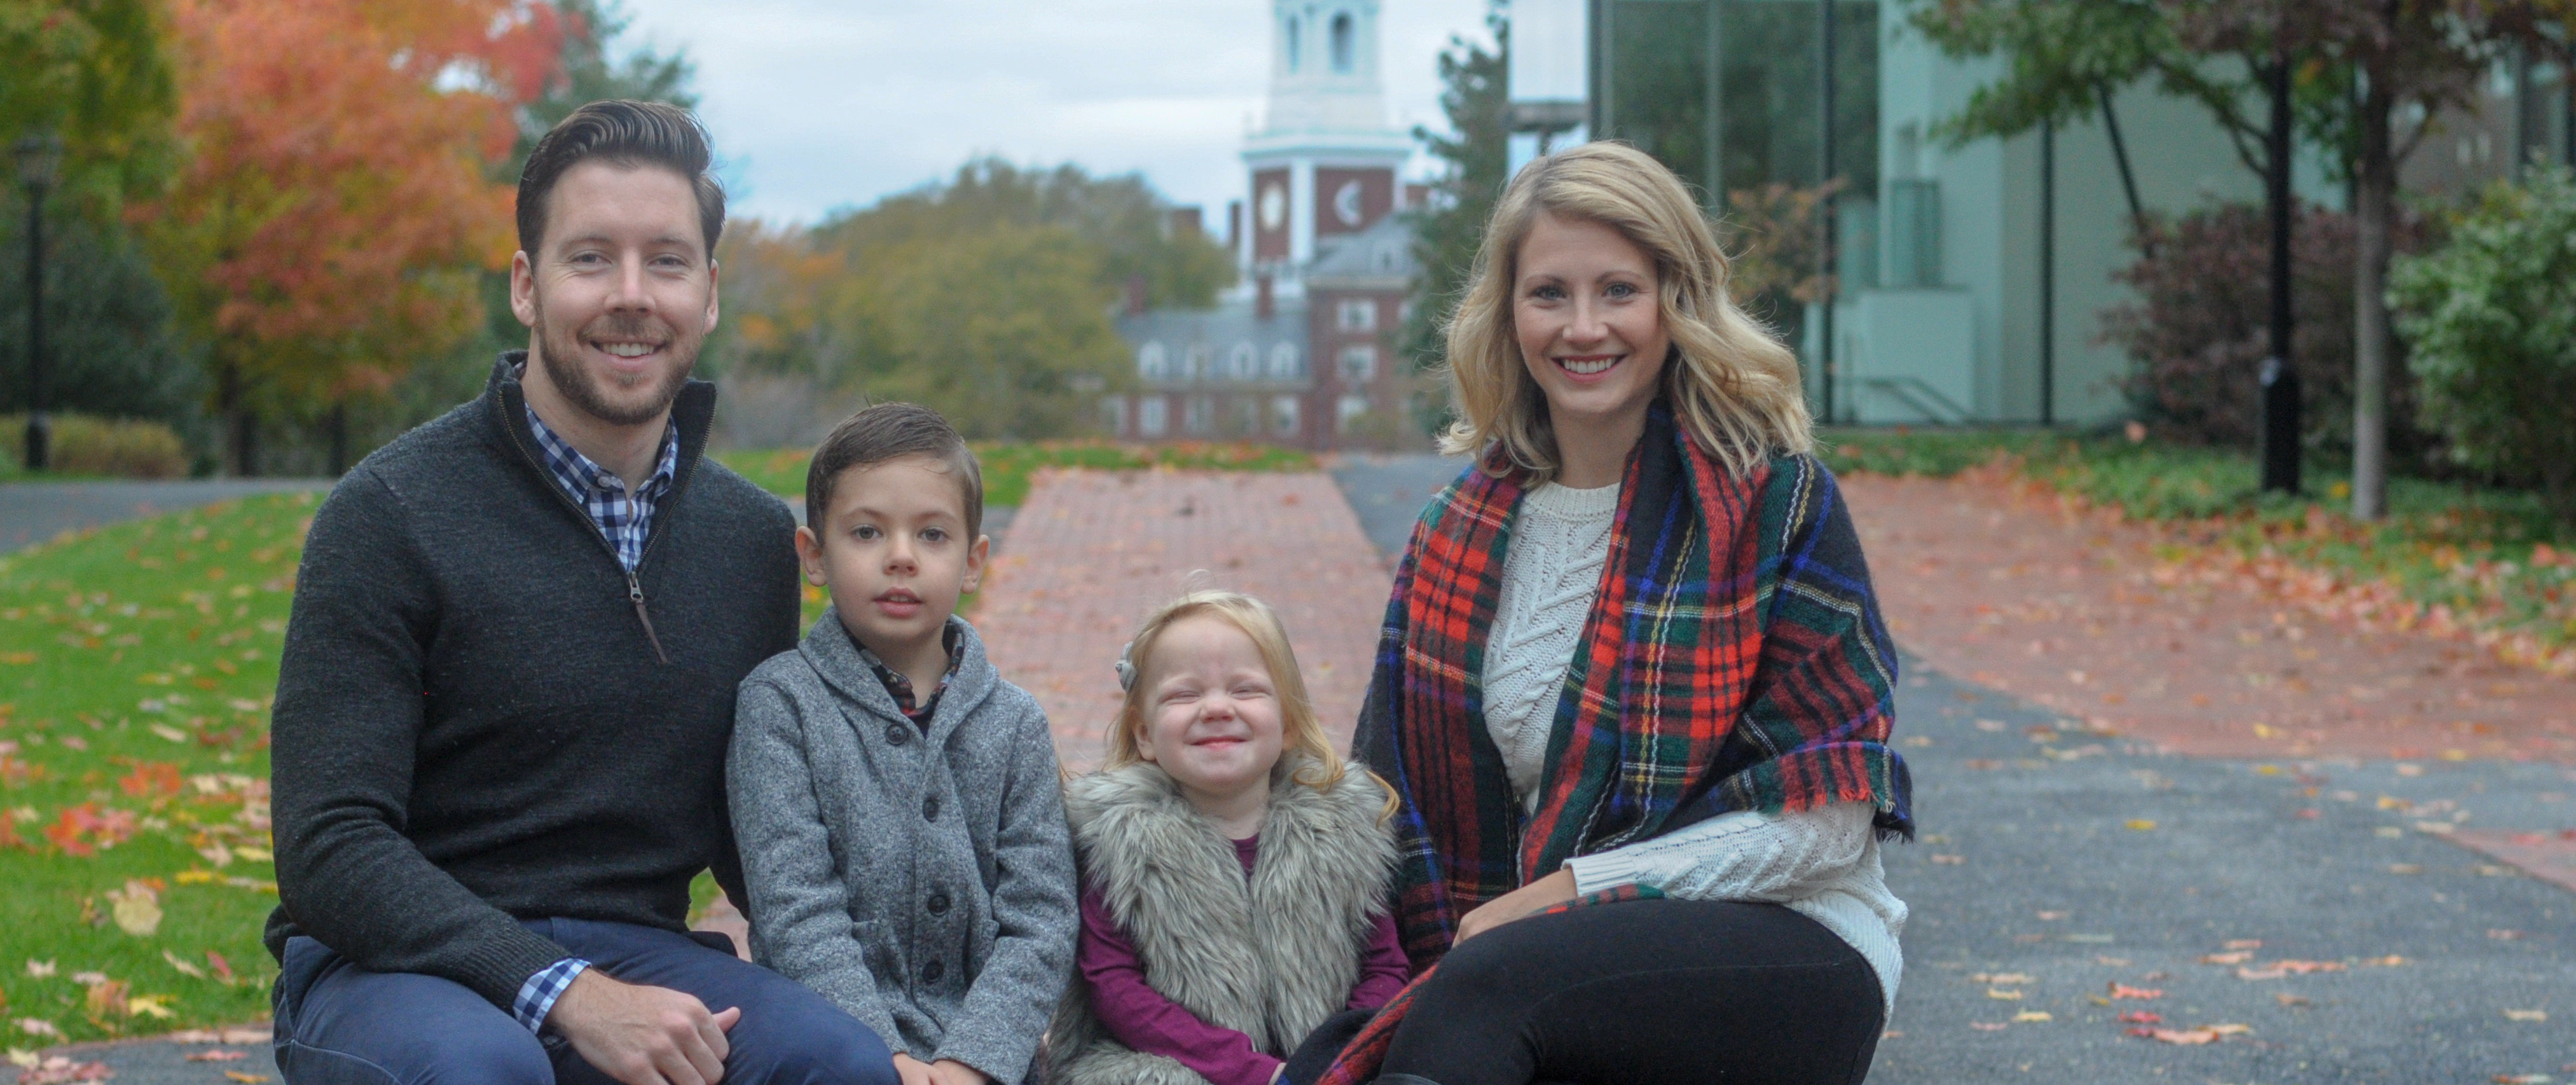 Being a Mom and Founder at HBS